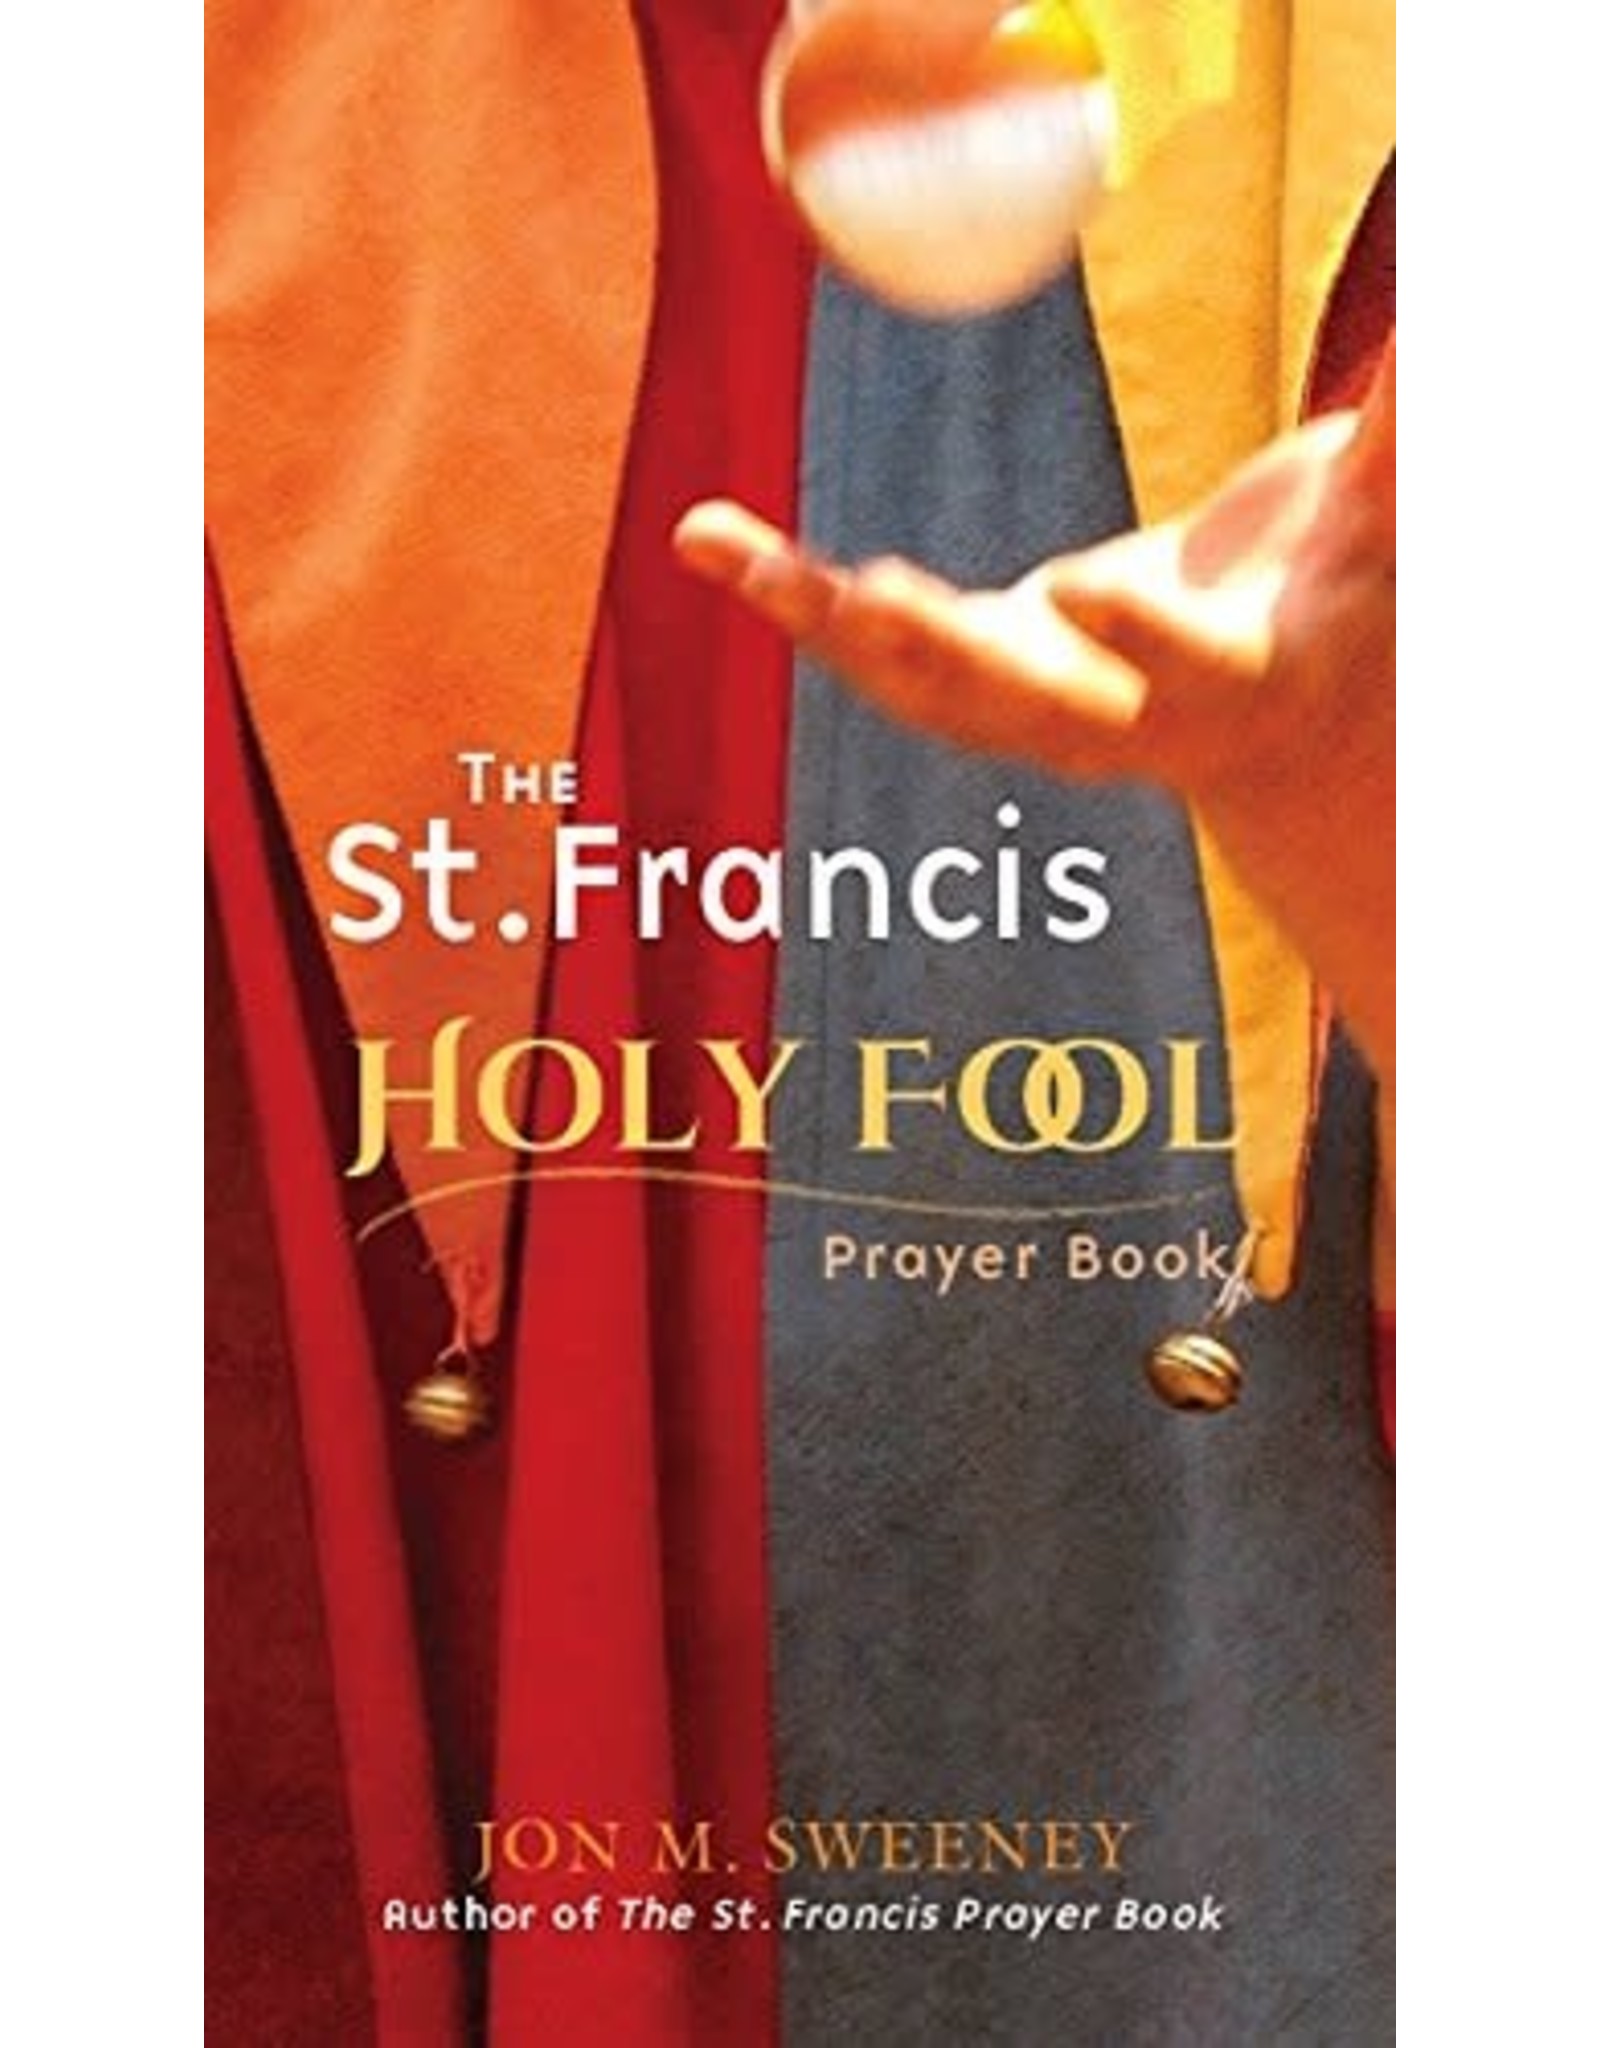 Paraclete Press The St. Francis Holy Fool Prayer Book by Jon M. Sweeney (Paperback)